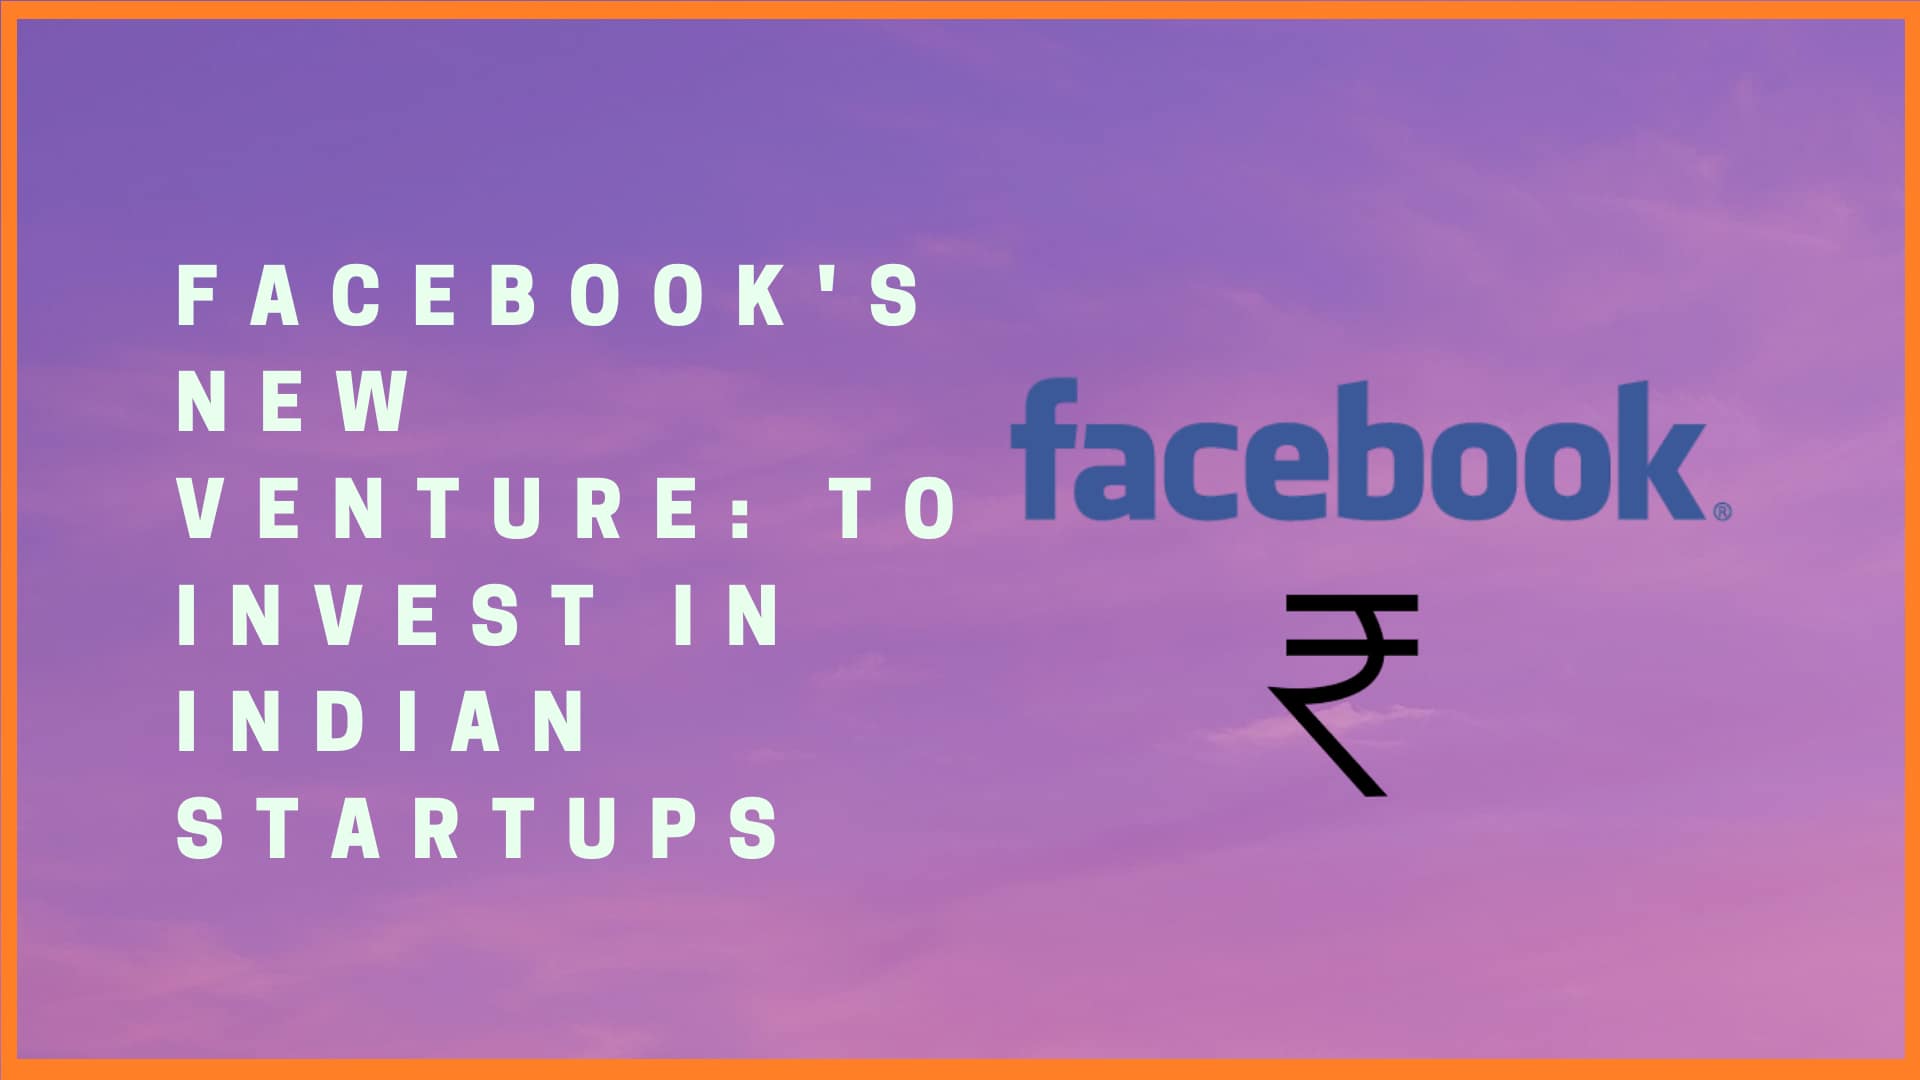 Facebook's New Venture: To Invest in Indian Startups